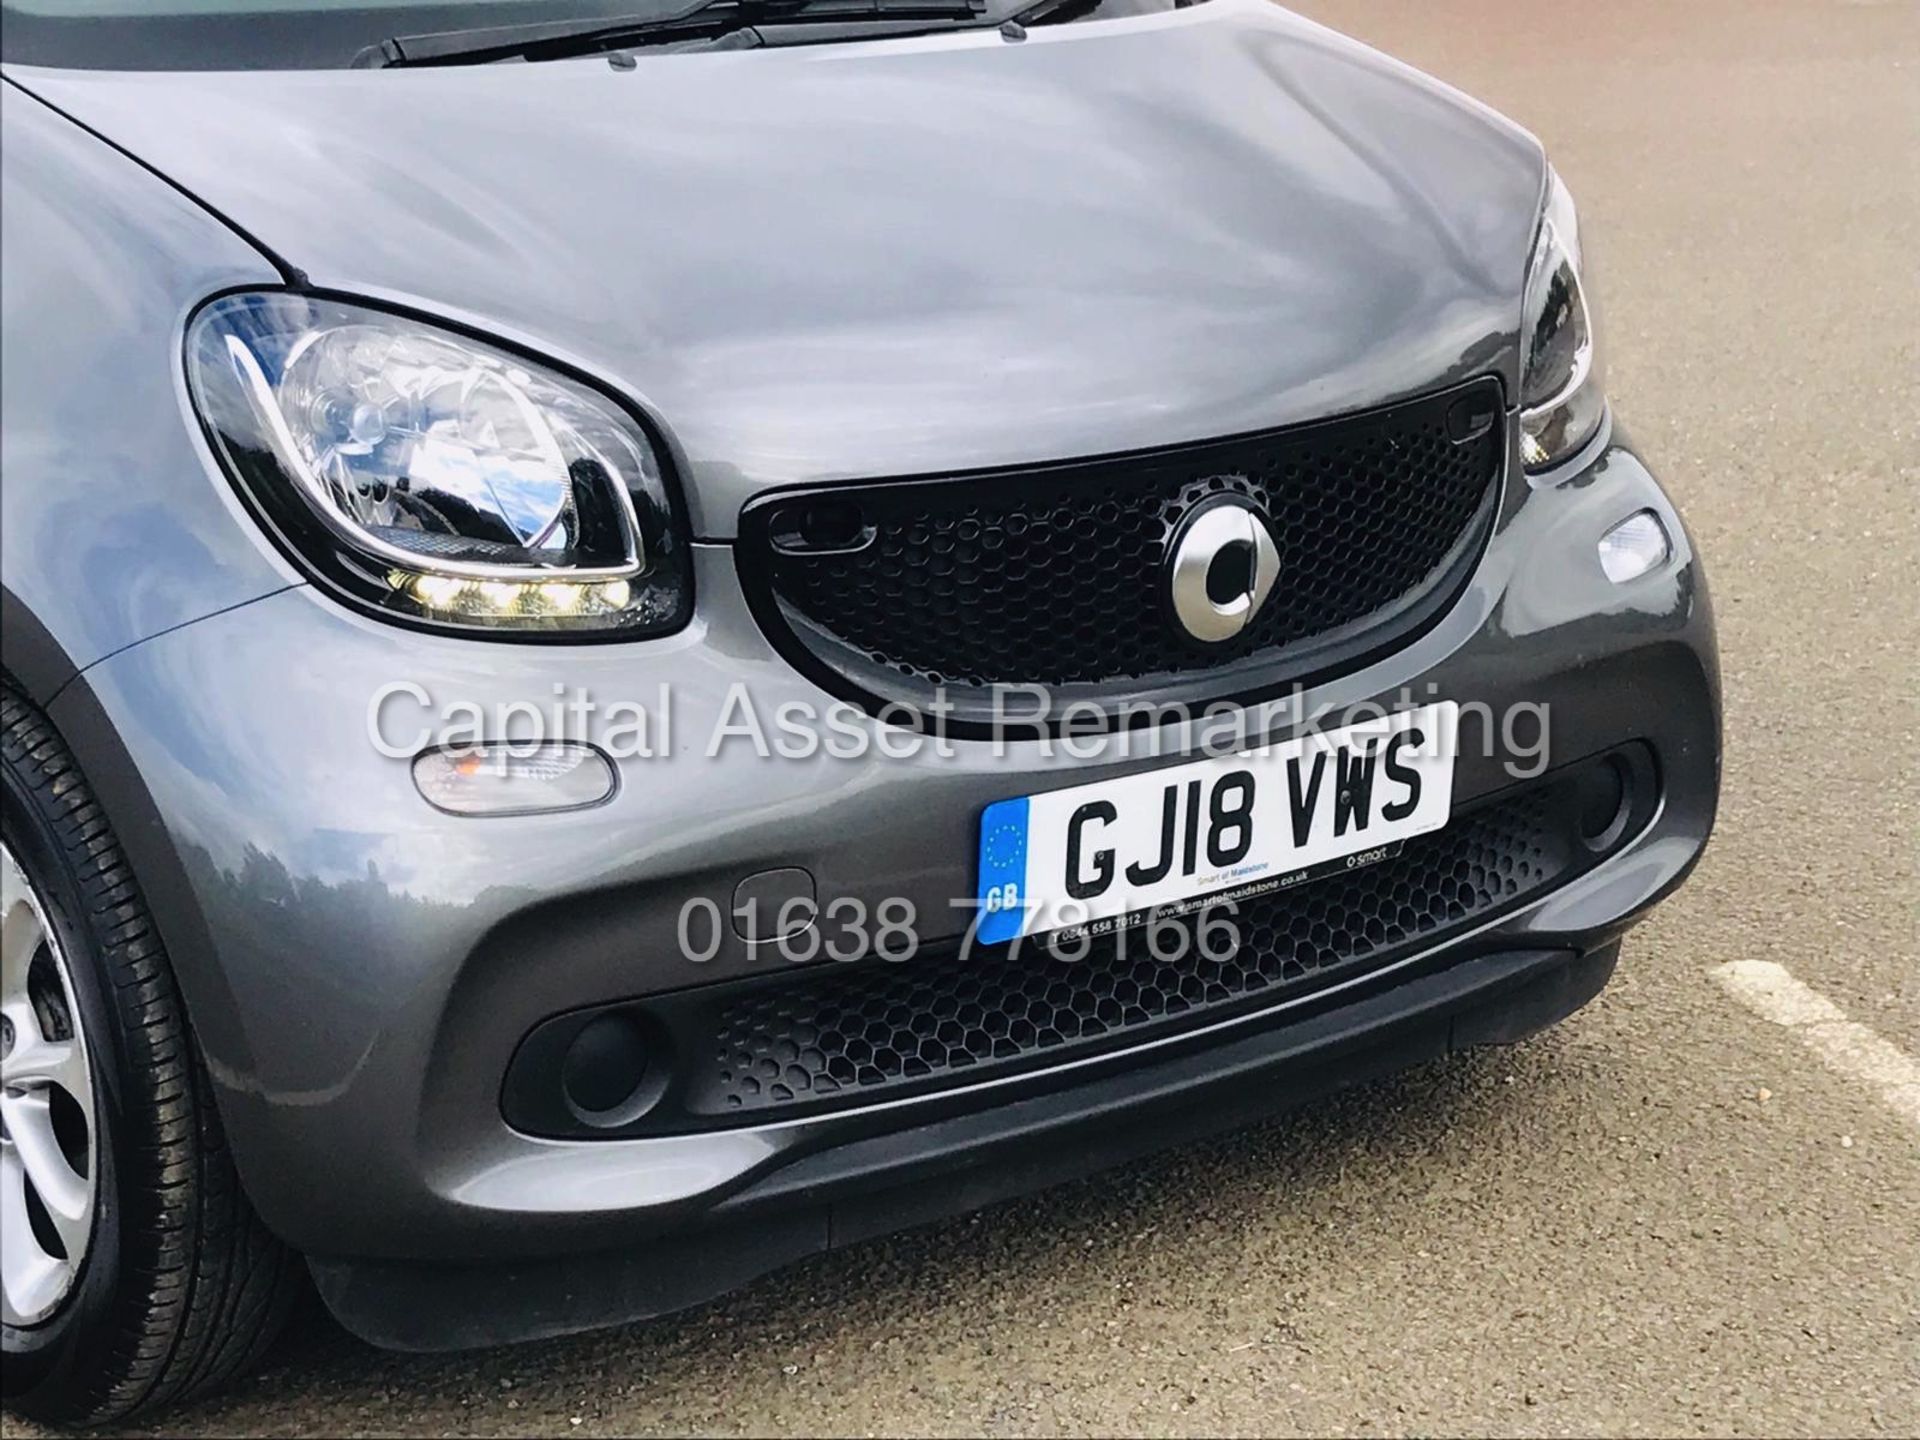 (ON SALE) MERCEDES SMART FORFOUR "PASSION" AUTO (2018-18 REG) 1 OWNER - LOW MILEAGE *AC & CLIMATE" - Image 3 of 35